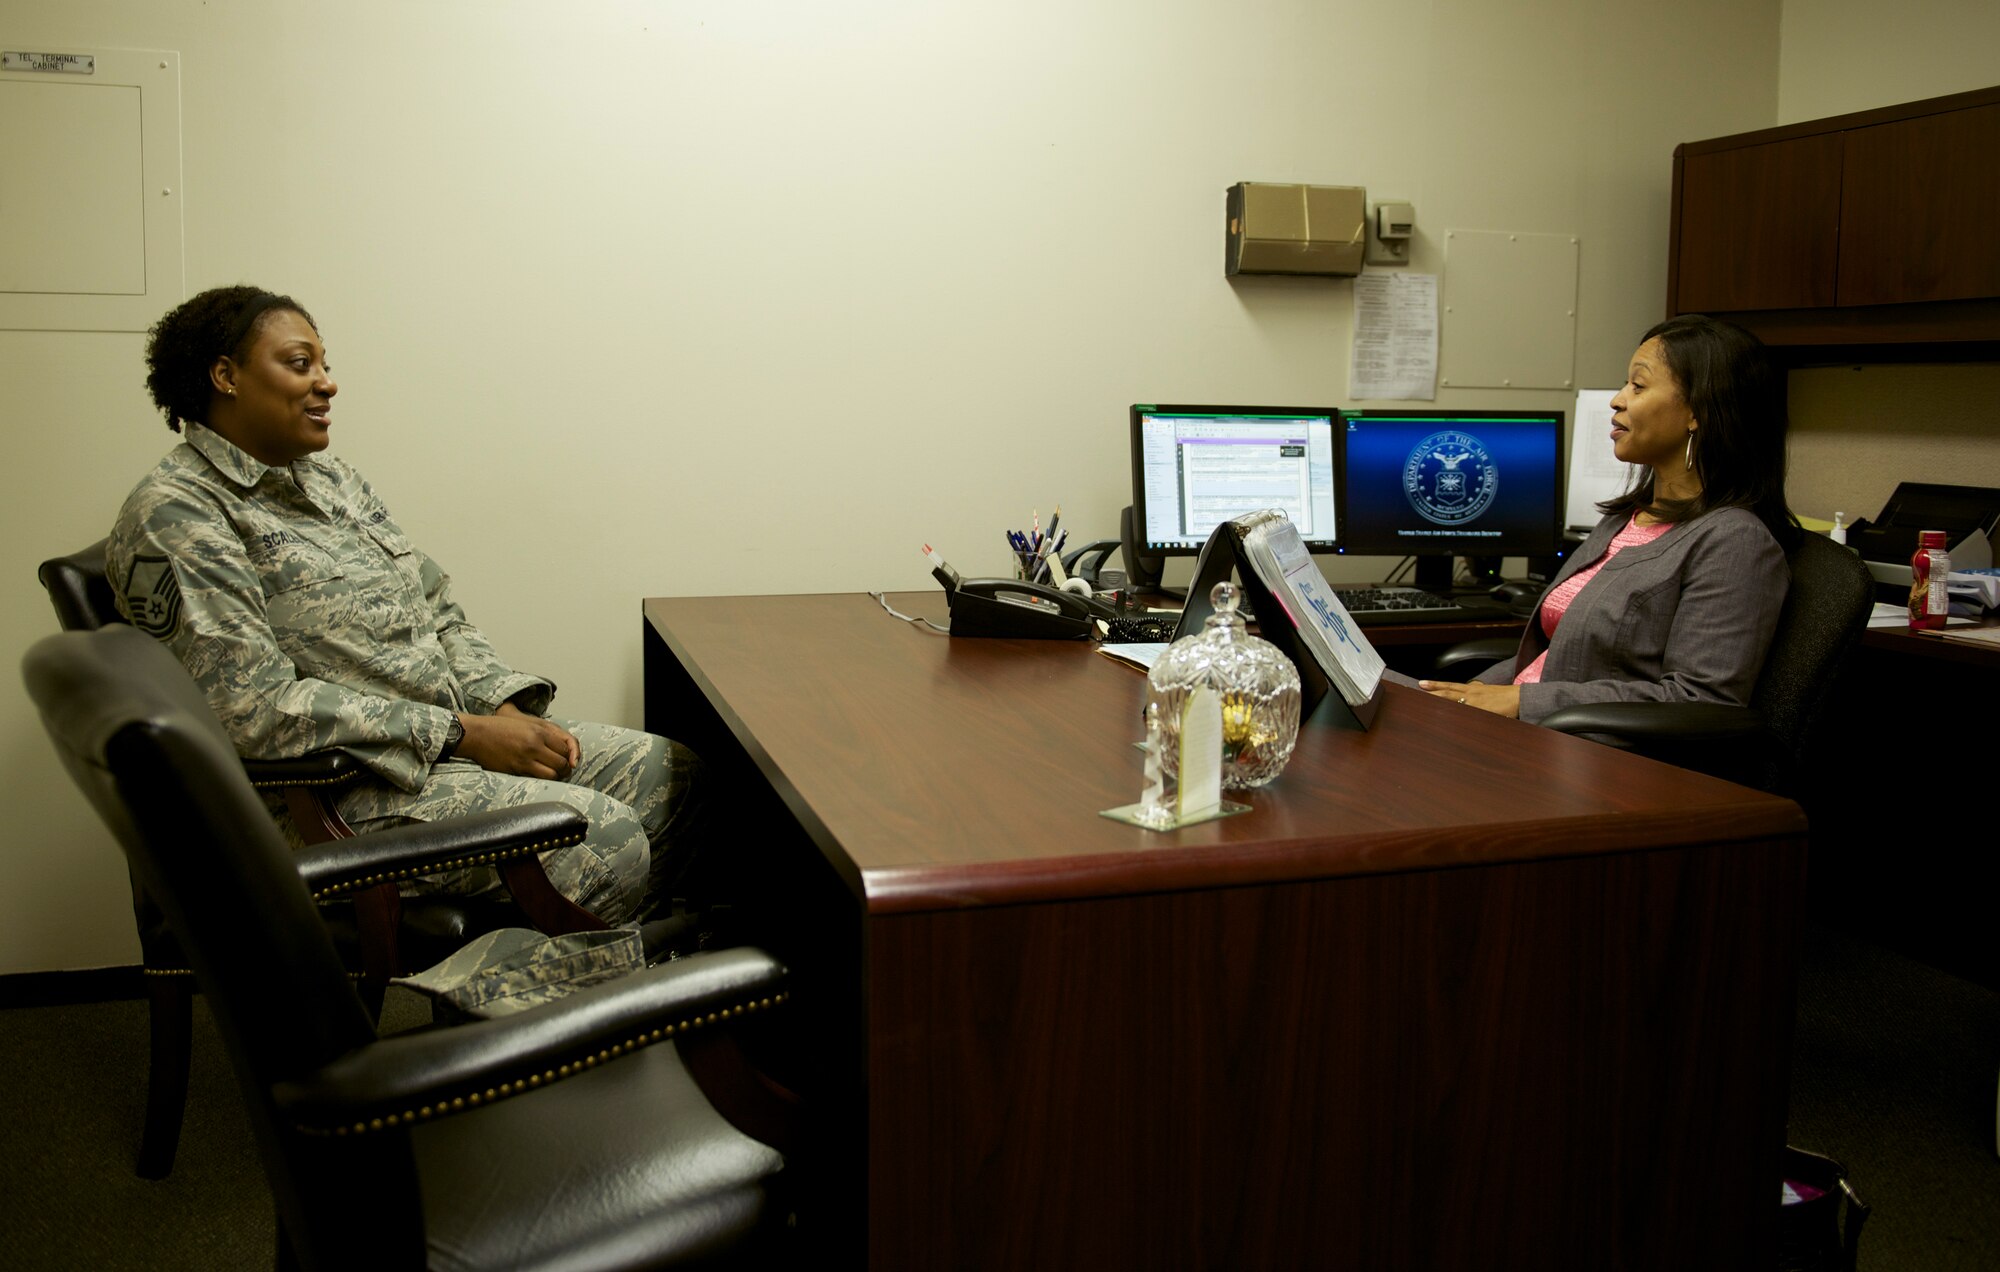 Tanquer Dyer, Yokota Casualty Assistance Representative, talks with Master Sgt. Nigesa Scales who is preparing to retire at Yokota Air Base, Japan, May 5, 2014. In addition to informing retiring military members at Yokota of the benefits available to them and their spouses, Dyer also assists family members of military casualties. (U.S. Air Force photo by Staff Sgt. Cody H. Ramirez)